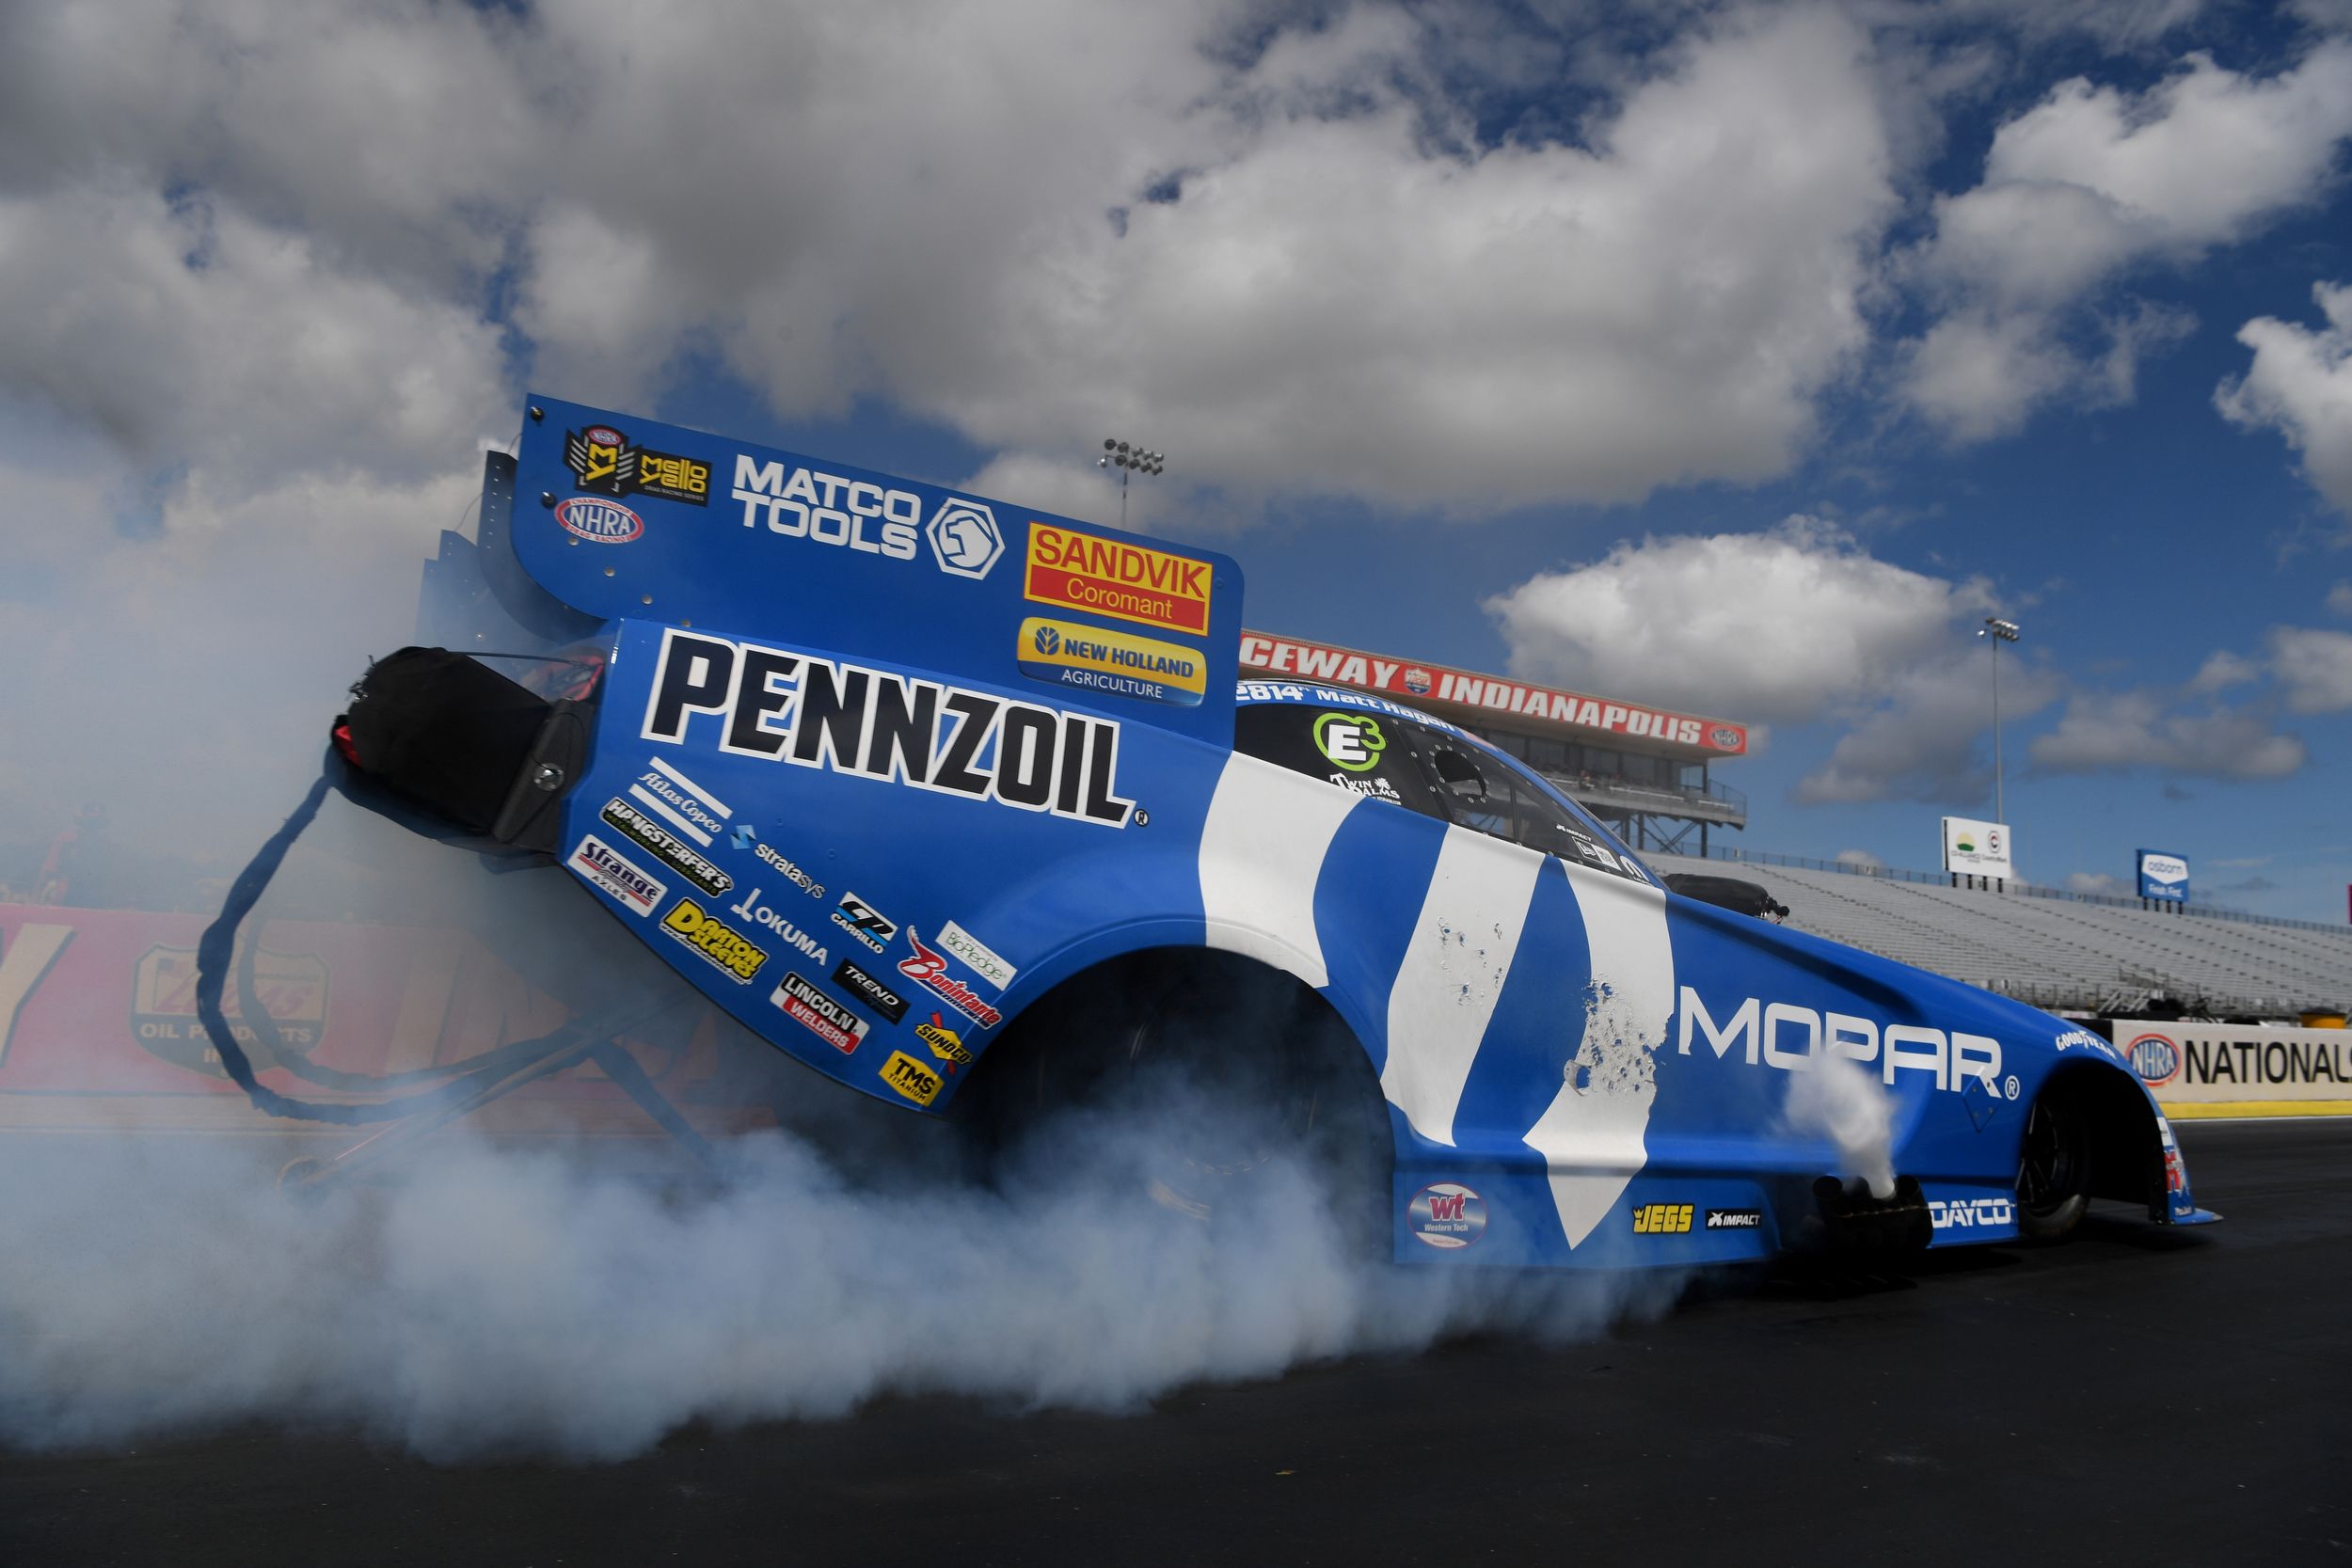 What We Learned from the Dodge NHRA Indy Nationals at Indianapolis